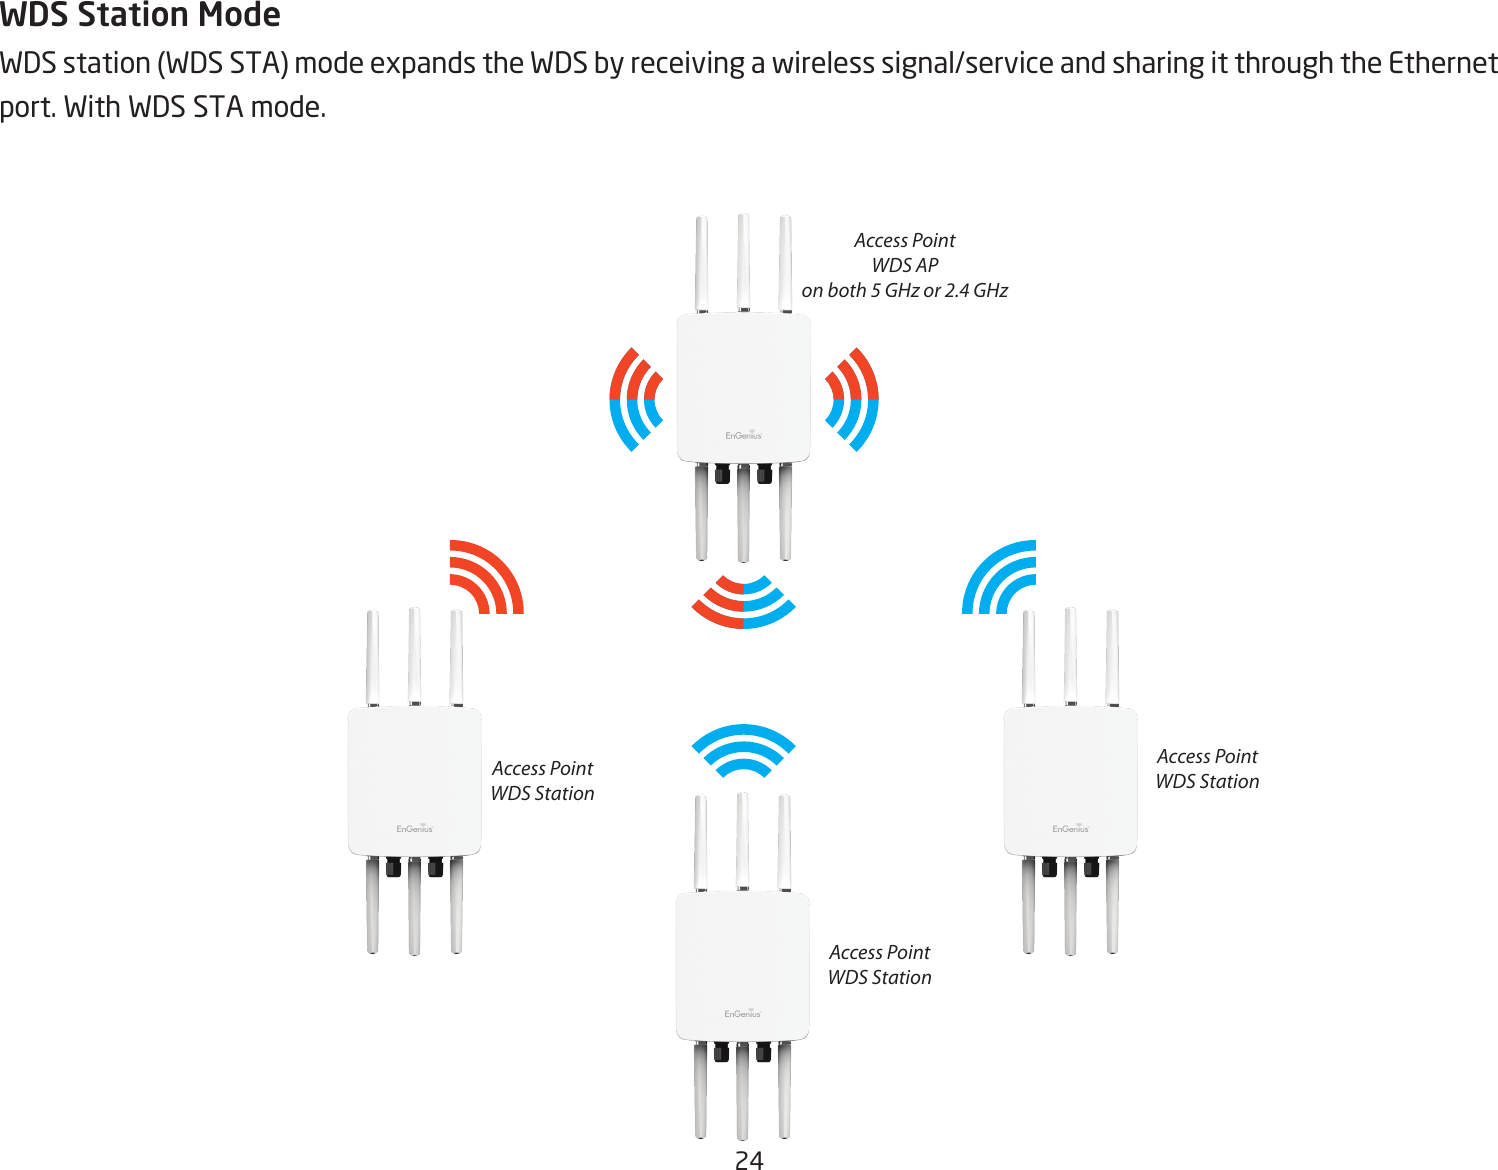 24WDS Station ModeWDS station (WDS STA) mode expands the WDS by receiving a wireless signal/service and sharing it through the Ethernet port. With WDS STA mode. Access PointWDS APon both 5 GHz or 2.4 GHzAccess PointWDS StationAccess PointWDS StationAccess PointWDS Station